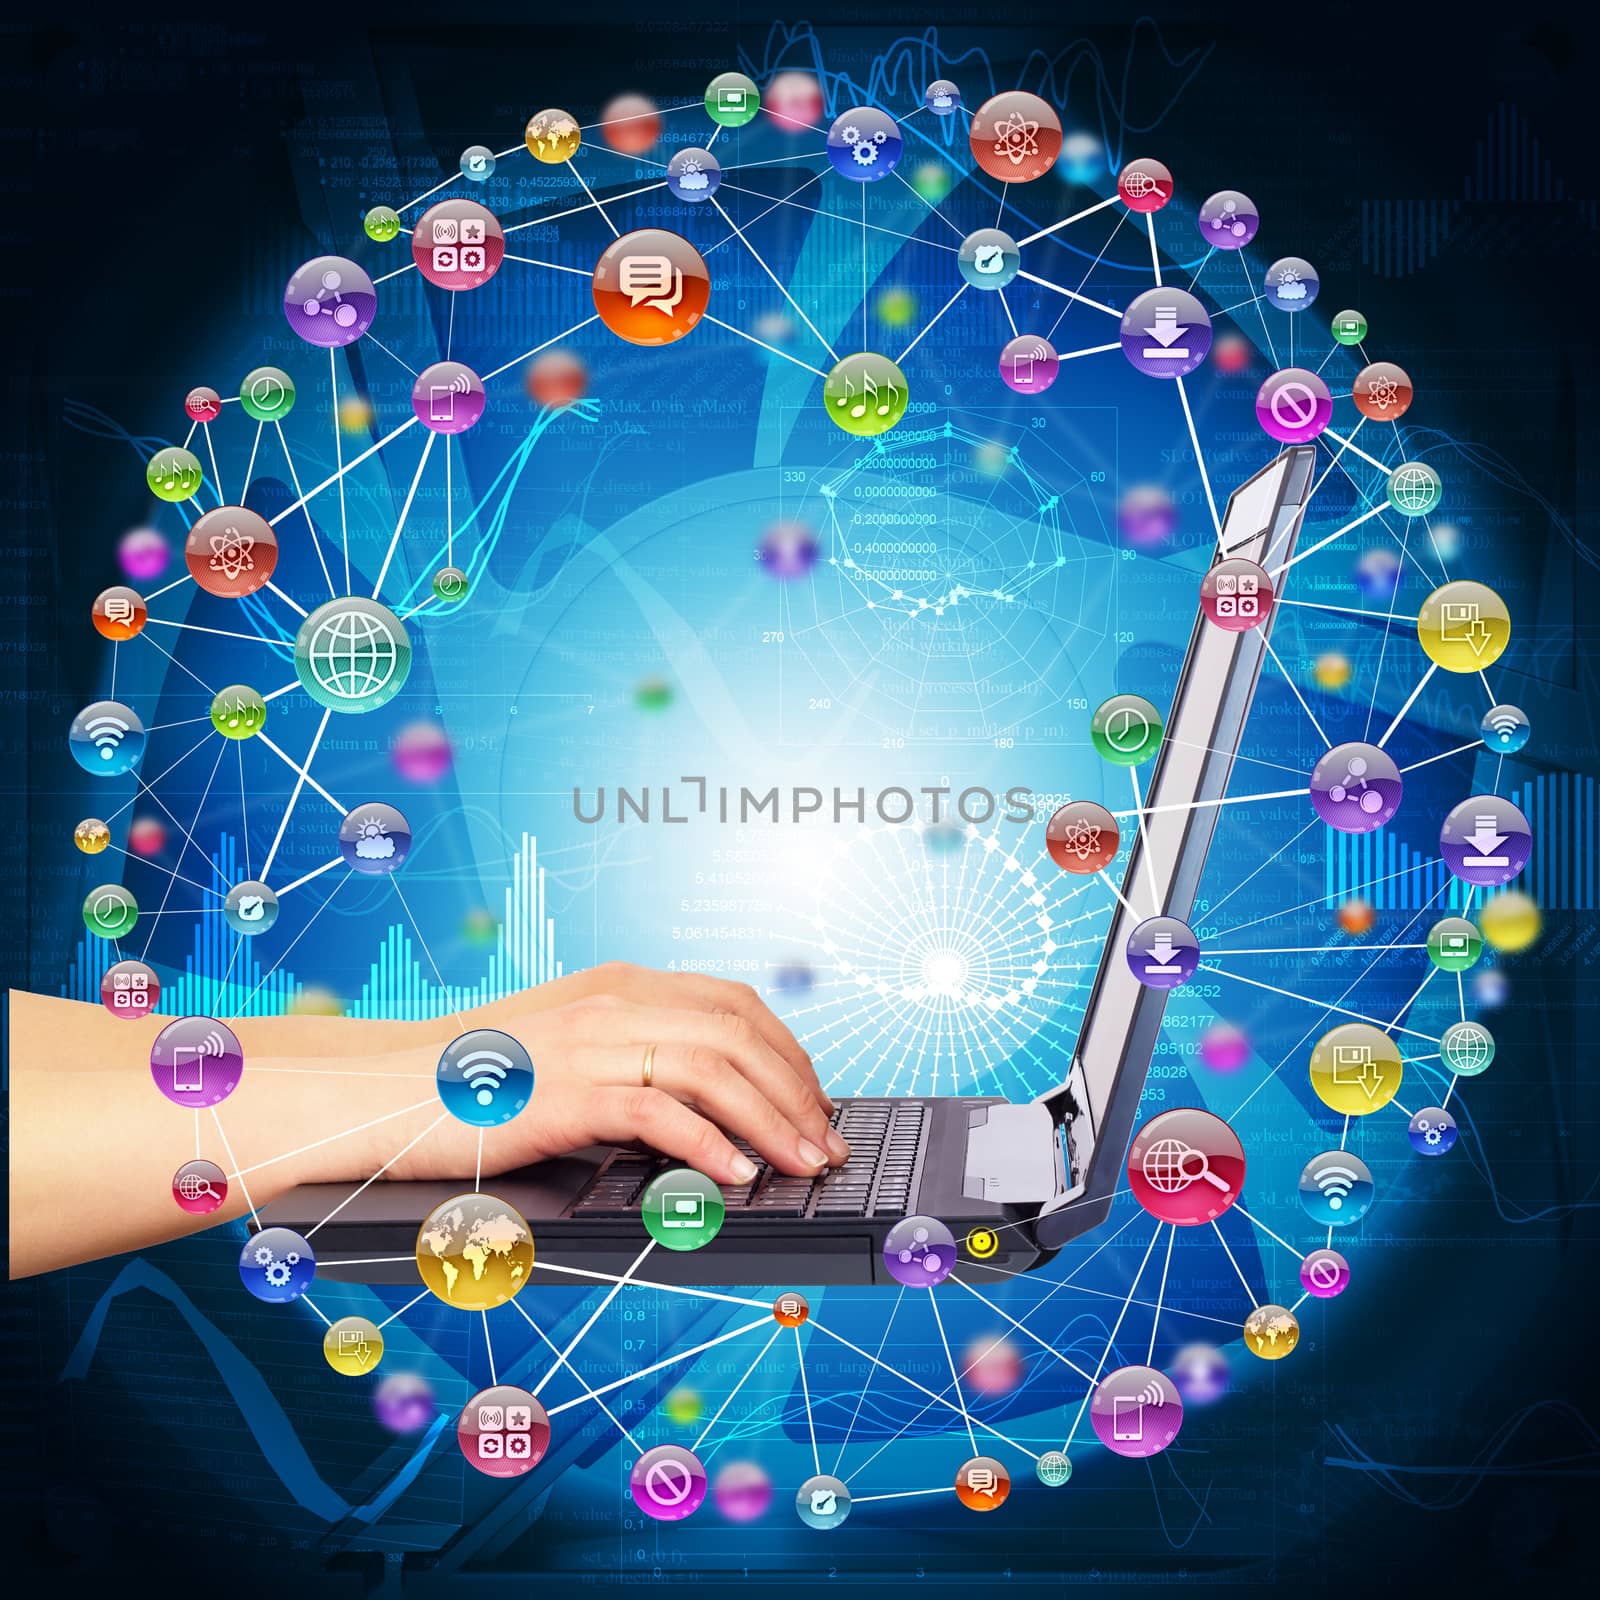 Female hands using  laptop, side view, in sphere, composed of icons, connected by lines. Graphs, figures and words as backdrop